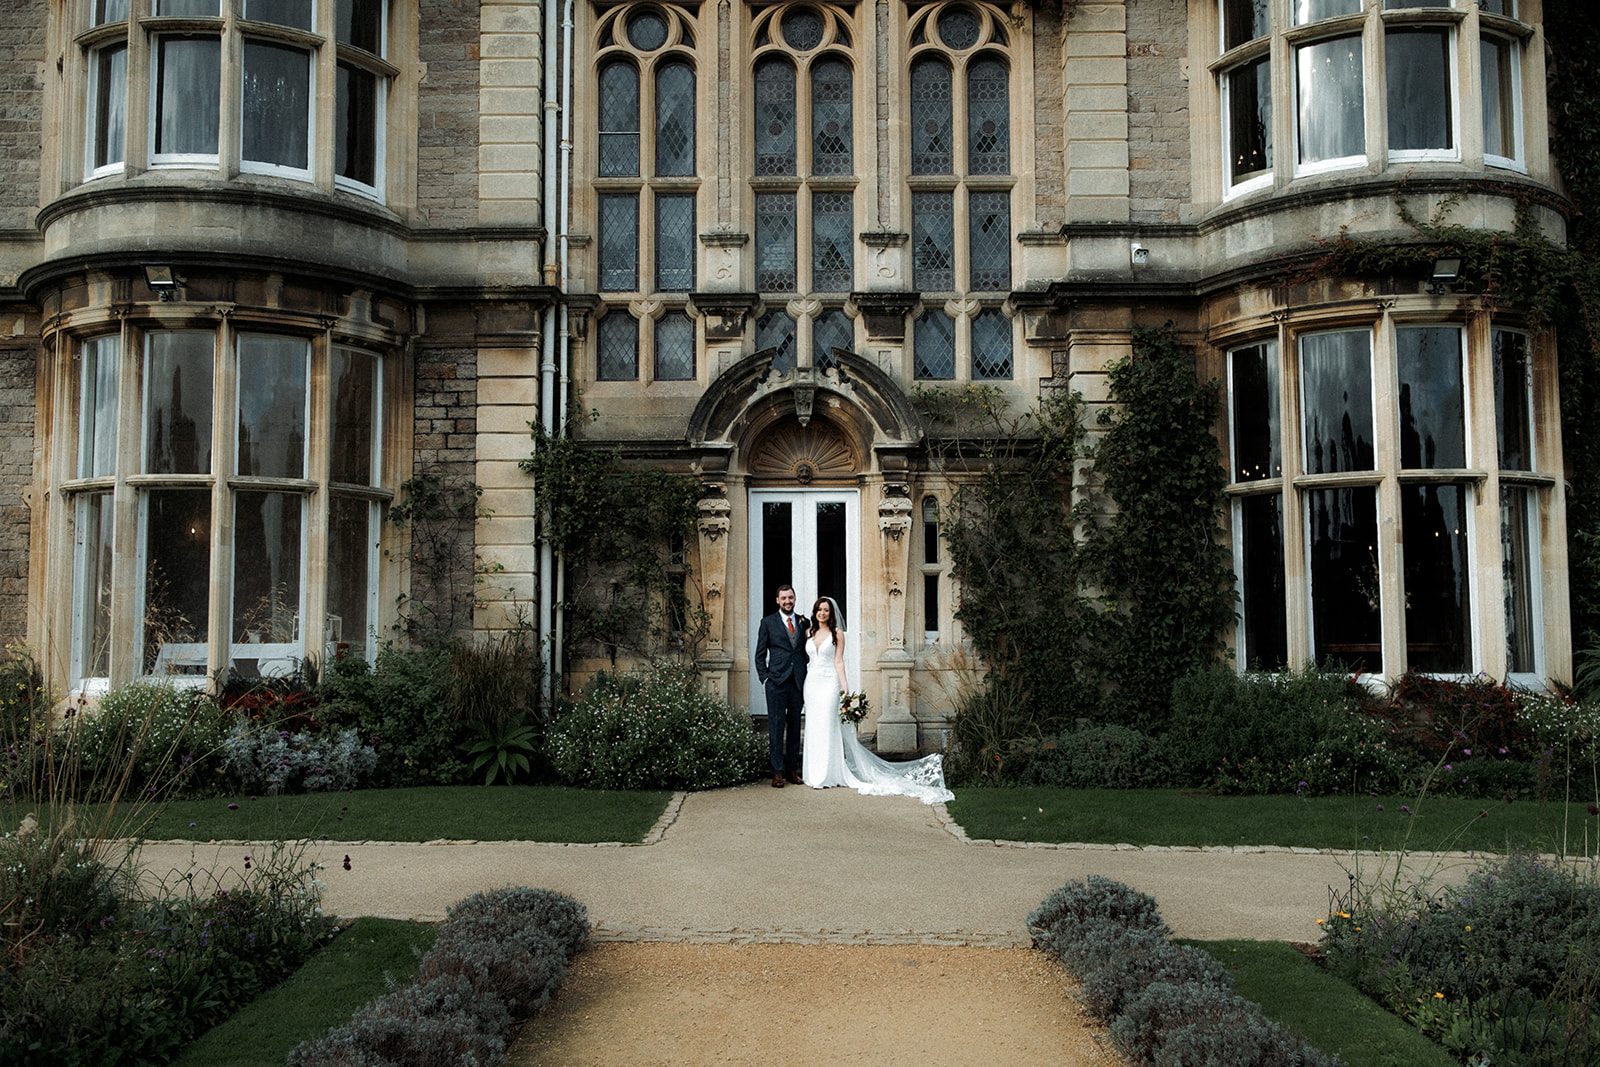 Romantic image of couple in front of Clevedon hall entrance